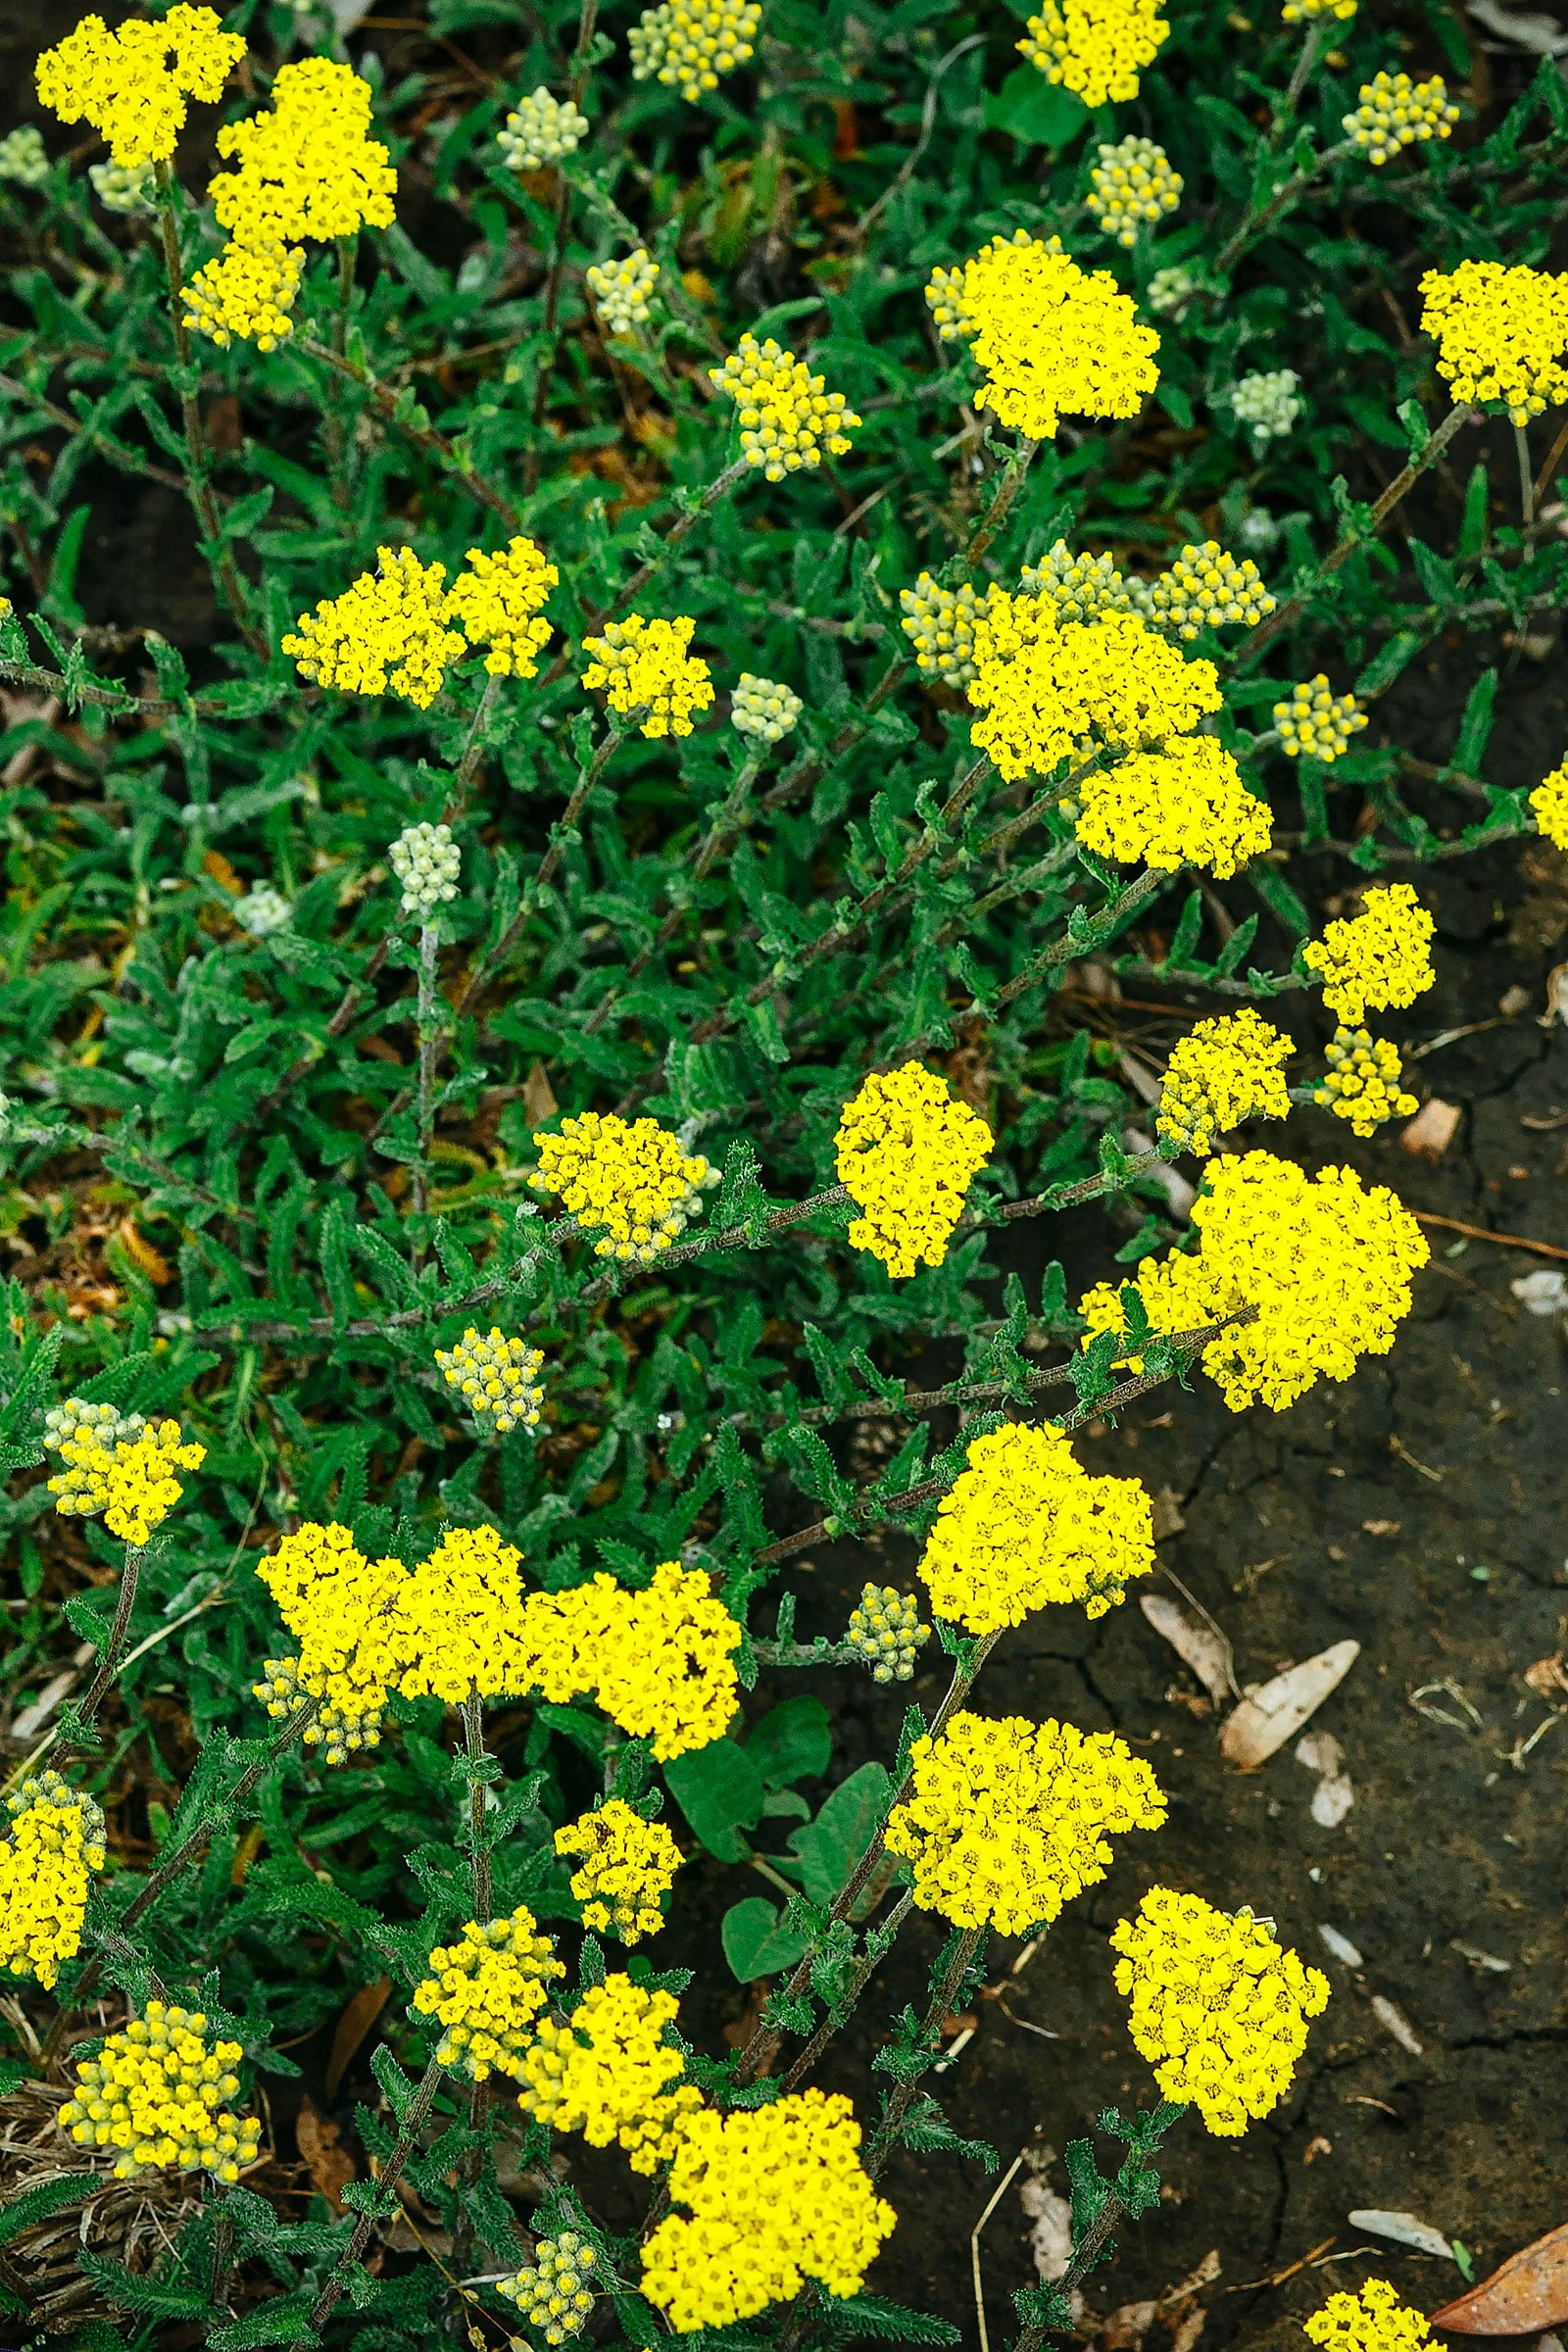 Dwarf yarrow with clusters of flower yellows on top